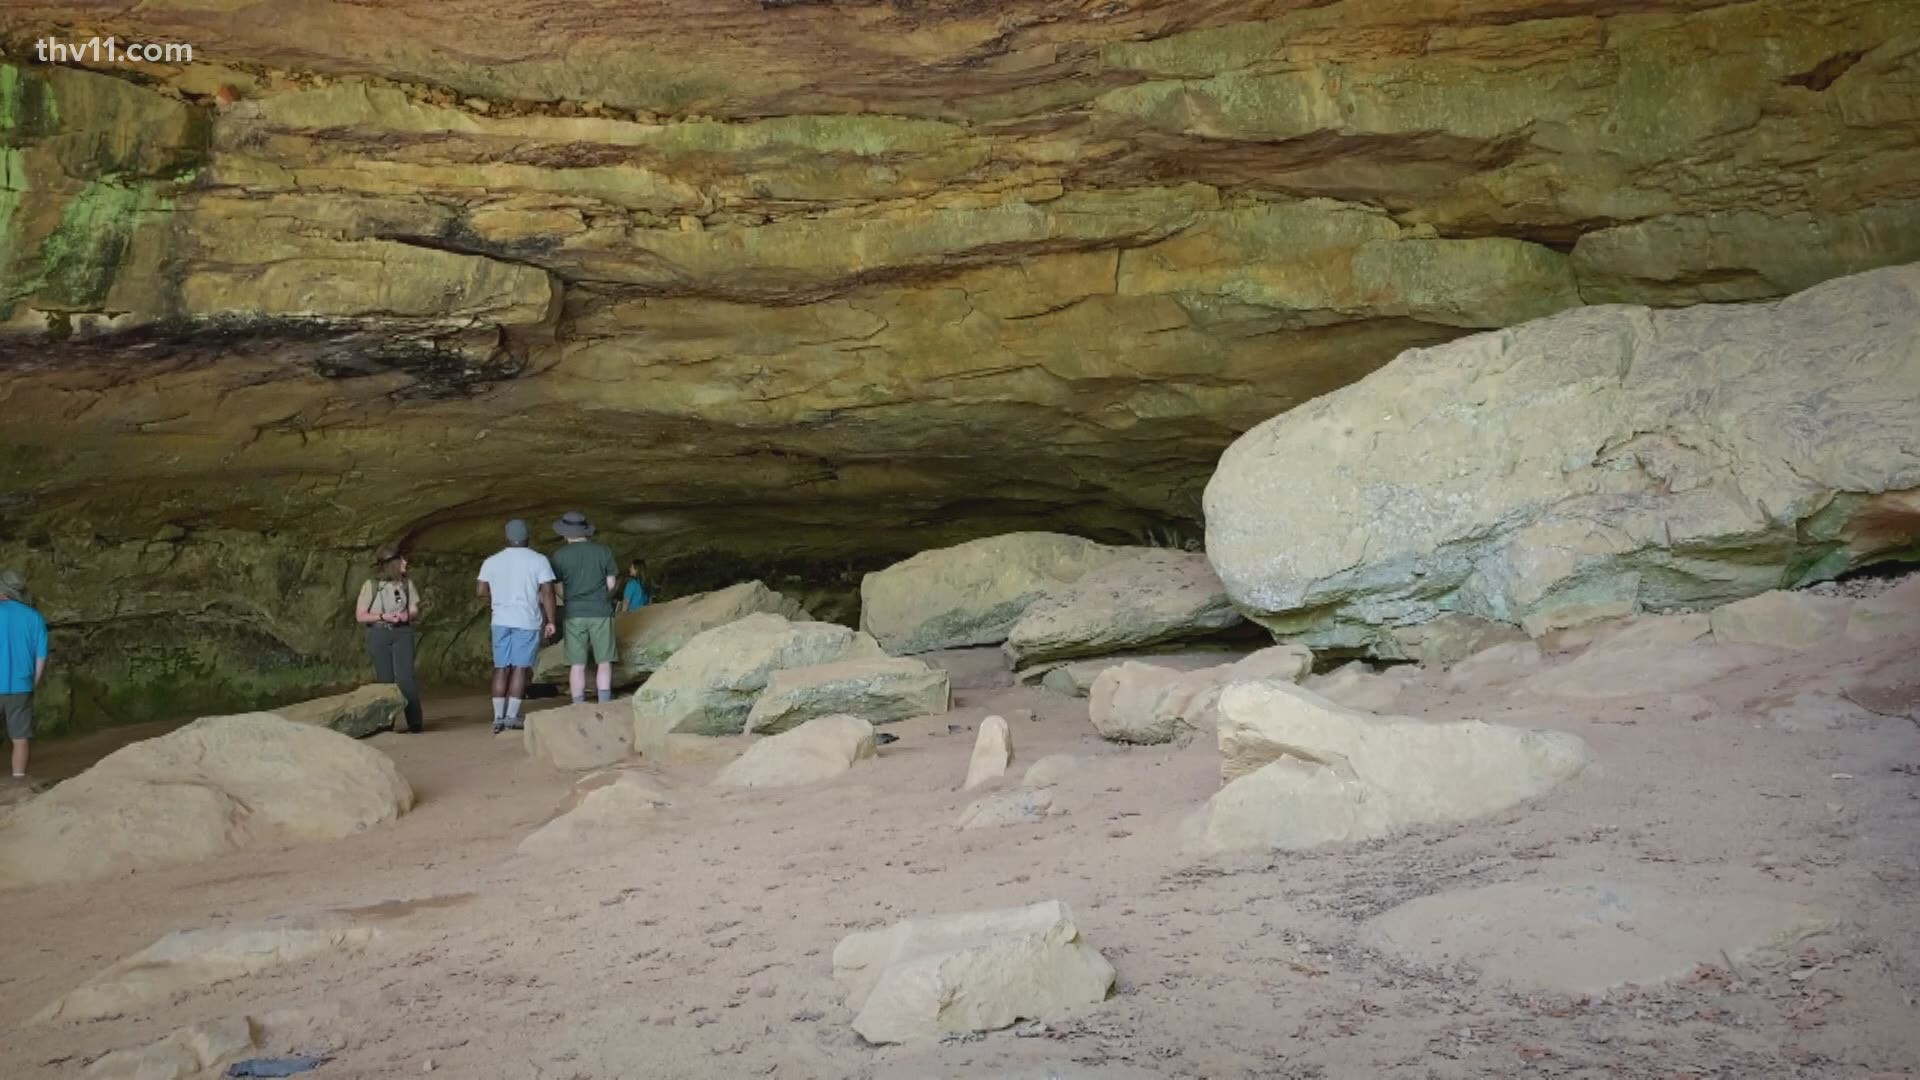 Theba Lolley and Ashley King went off the beaten path for this week’s Discover Arkansas and found the Rock House Cave at Petit Jean State Park.